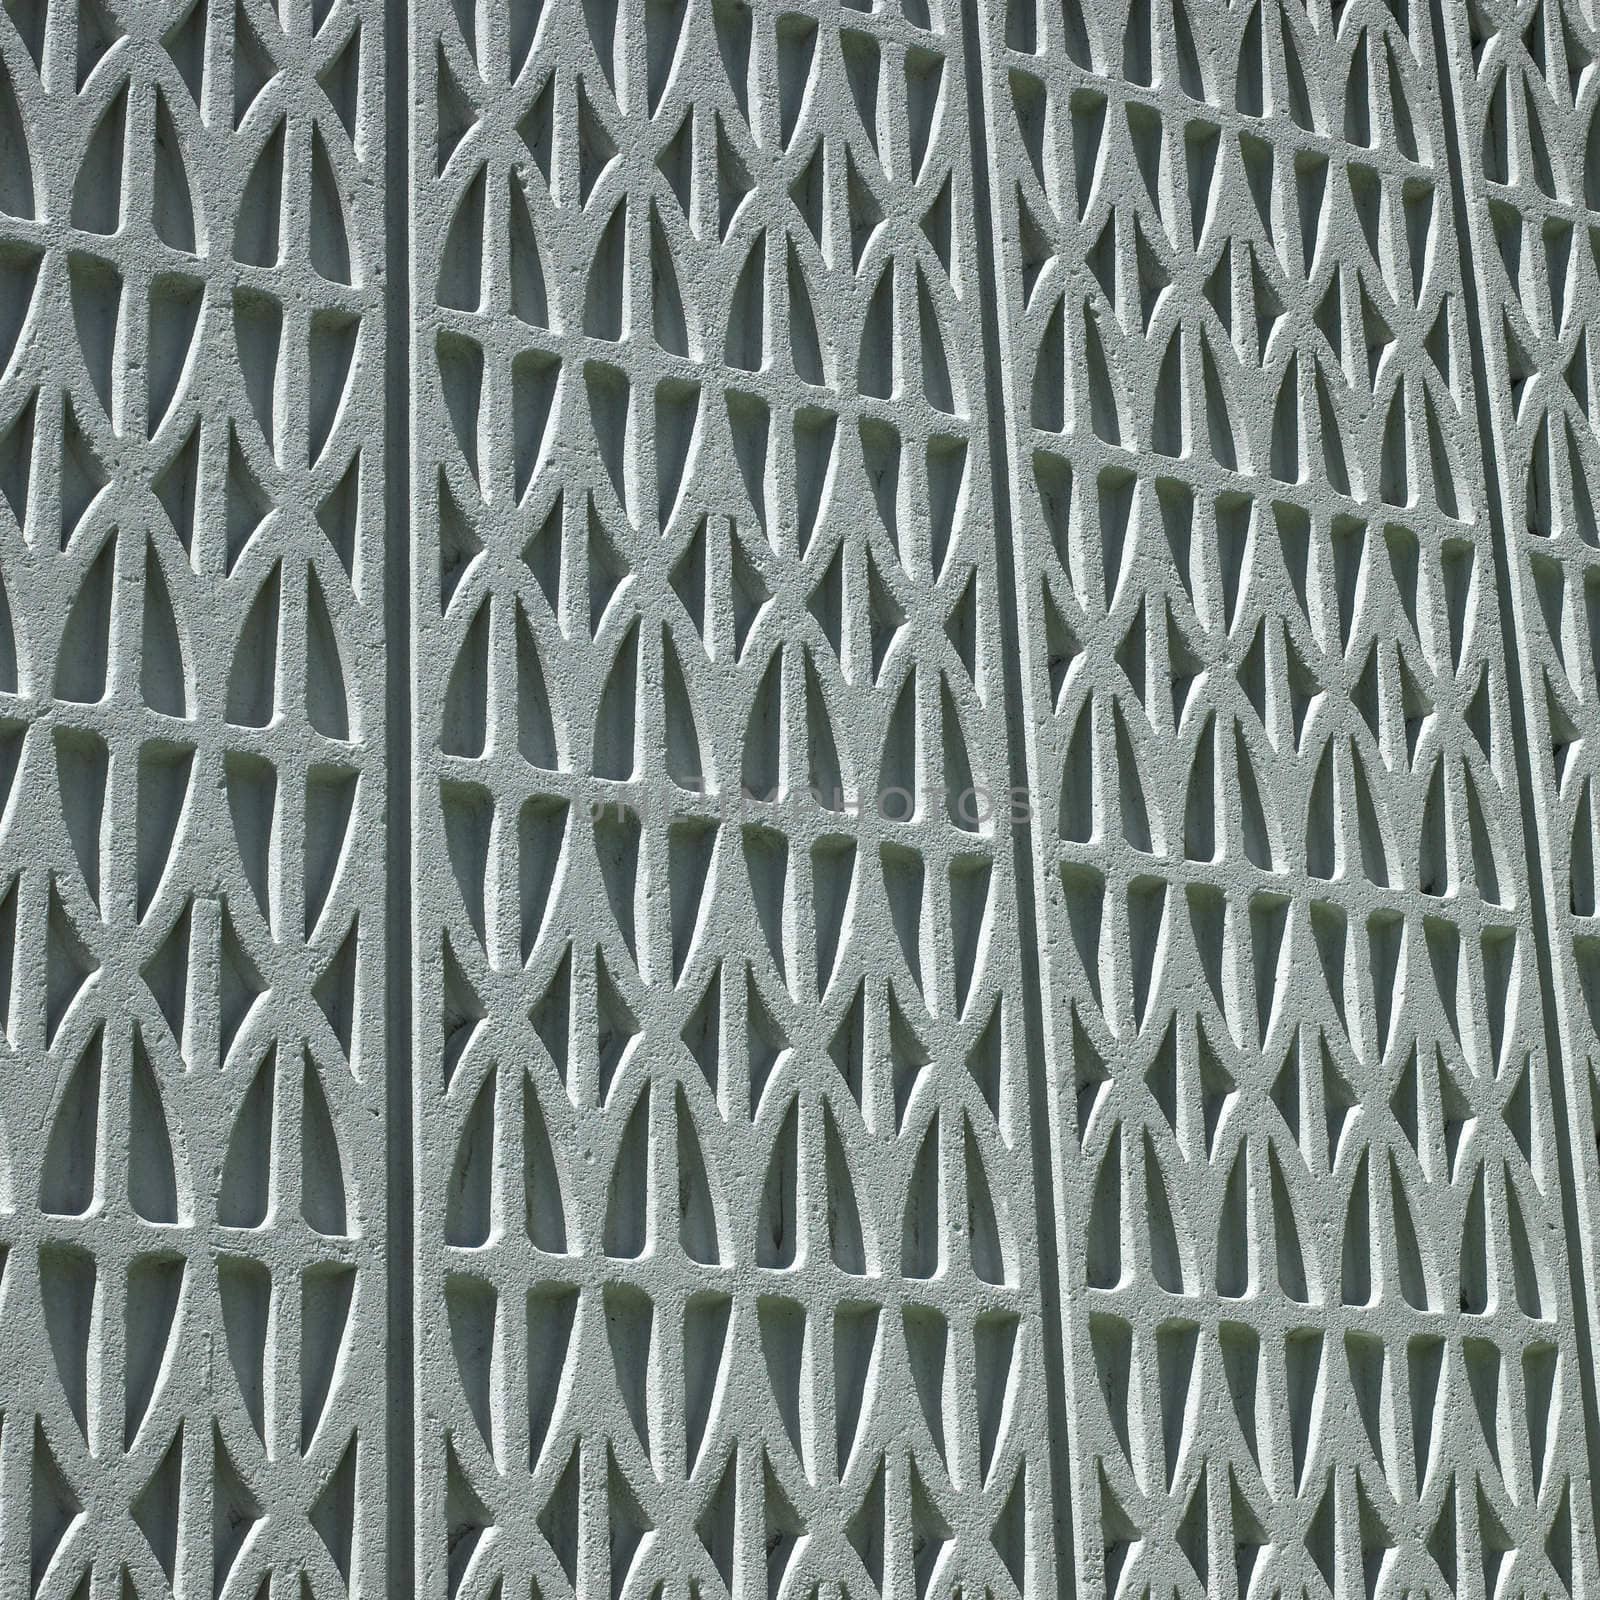 Patterned wall